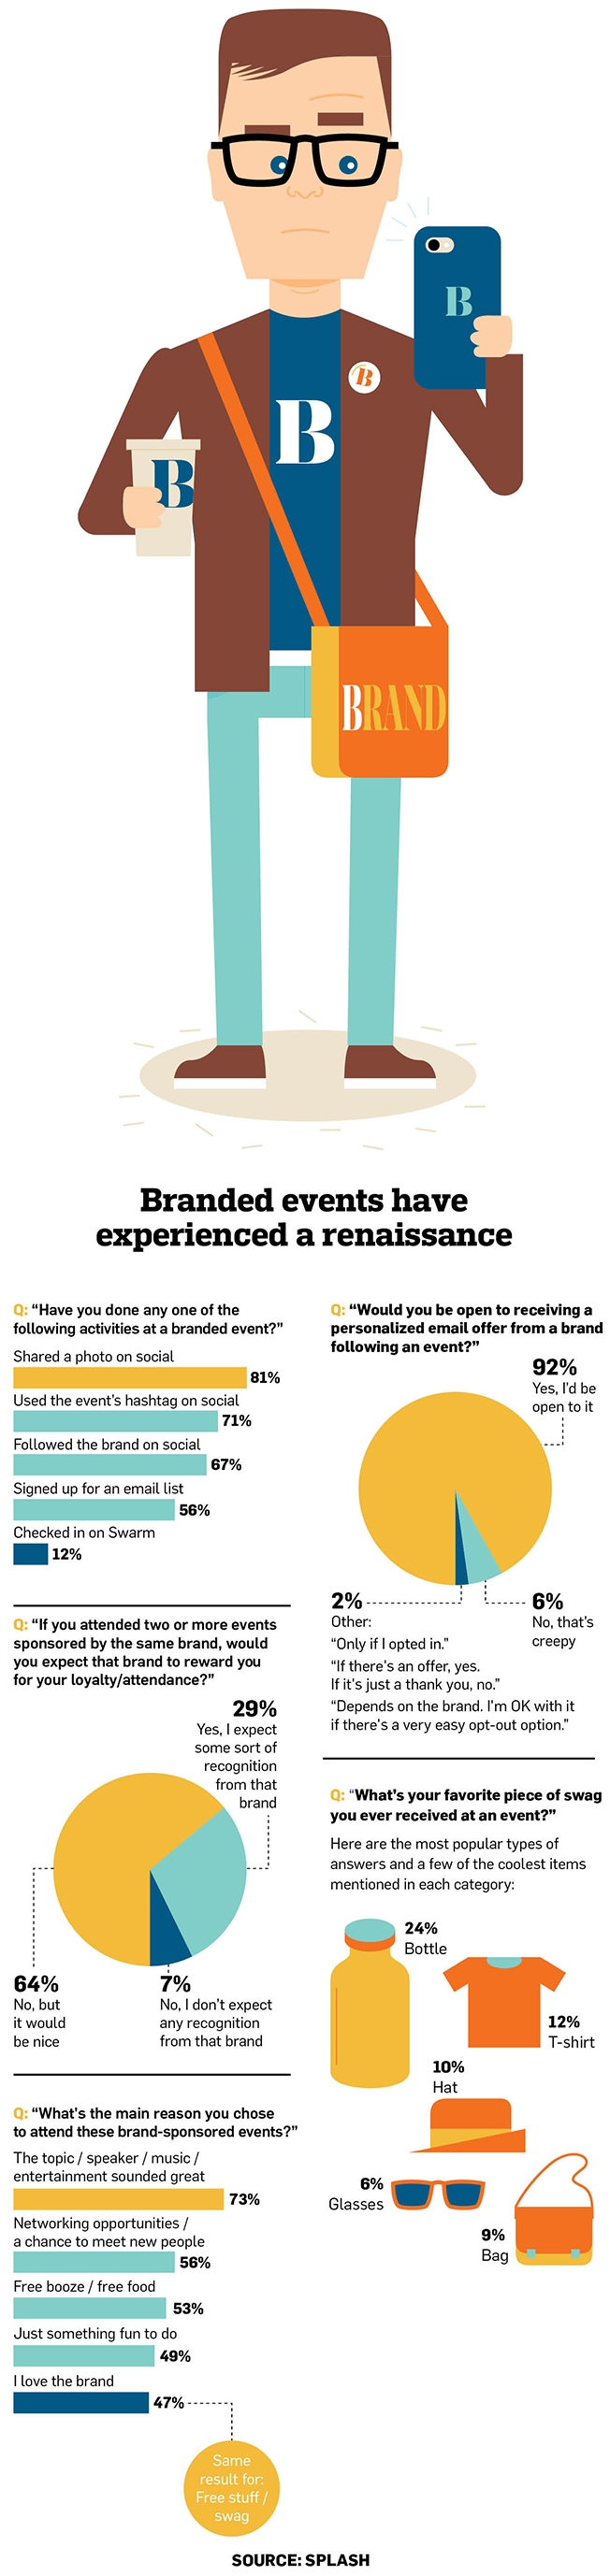 http://www.adweek.com/news/advertising-branding/infographic-what-millennials-want-see-and-take-home-branded-events-169996